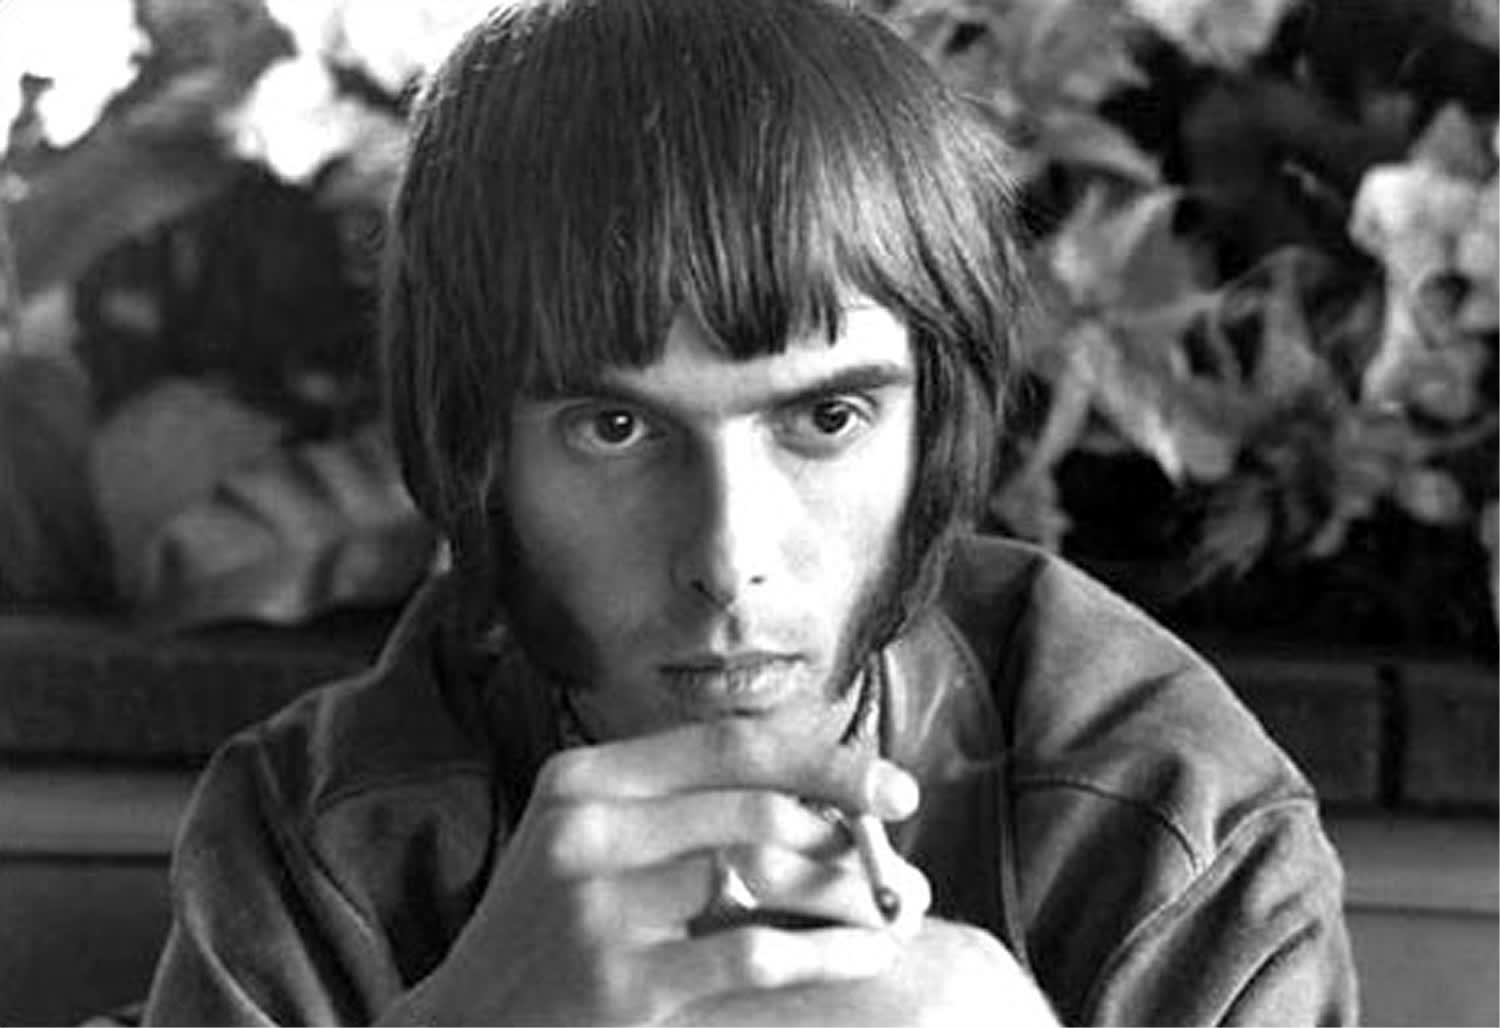 On February 24th, 1944, Nicky Hopkins was born in London, England. Hopkins was a in-demand session pianist who played for Quicksilver Messenger Service, Jeff Beck, The Beatles, The Rolling Stones, John Lennon, Steve Miller, Small Faces, The Who, The Kinks, Nilsson, Donovan and others